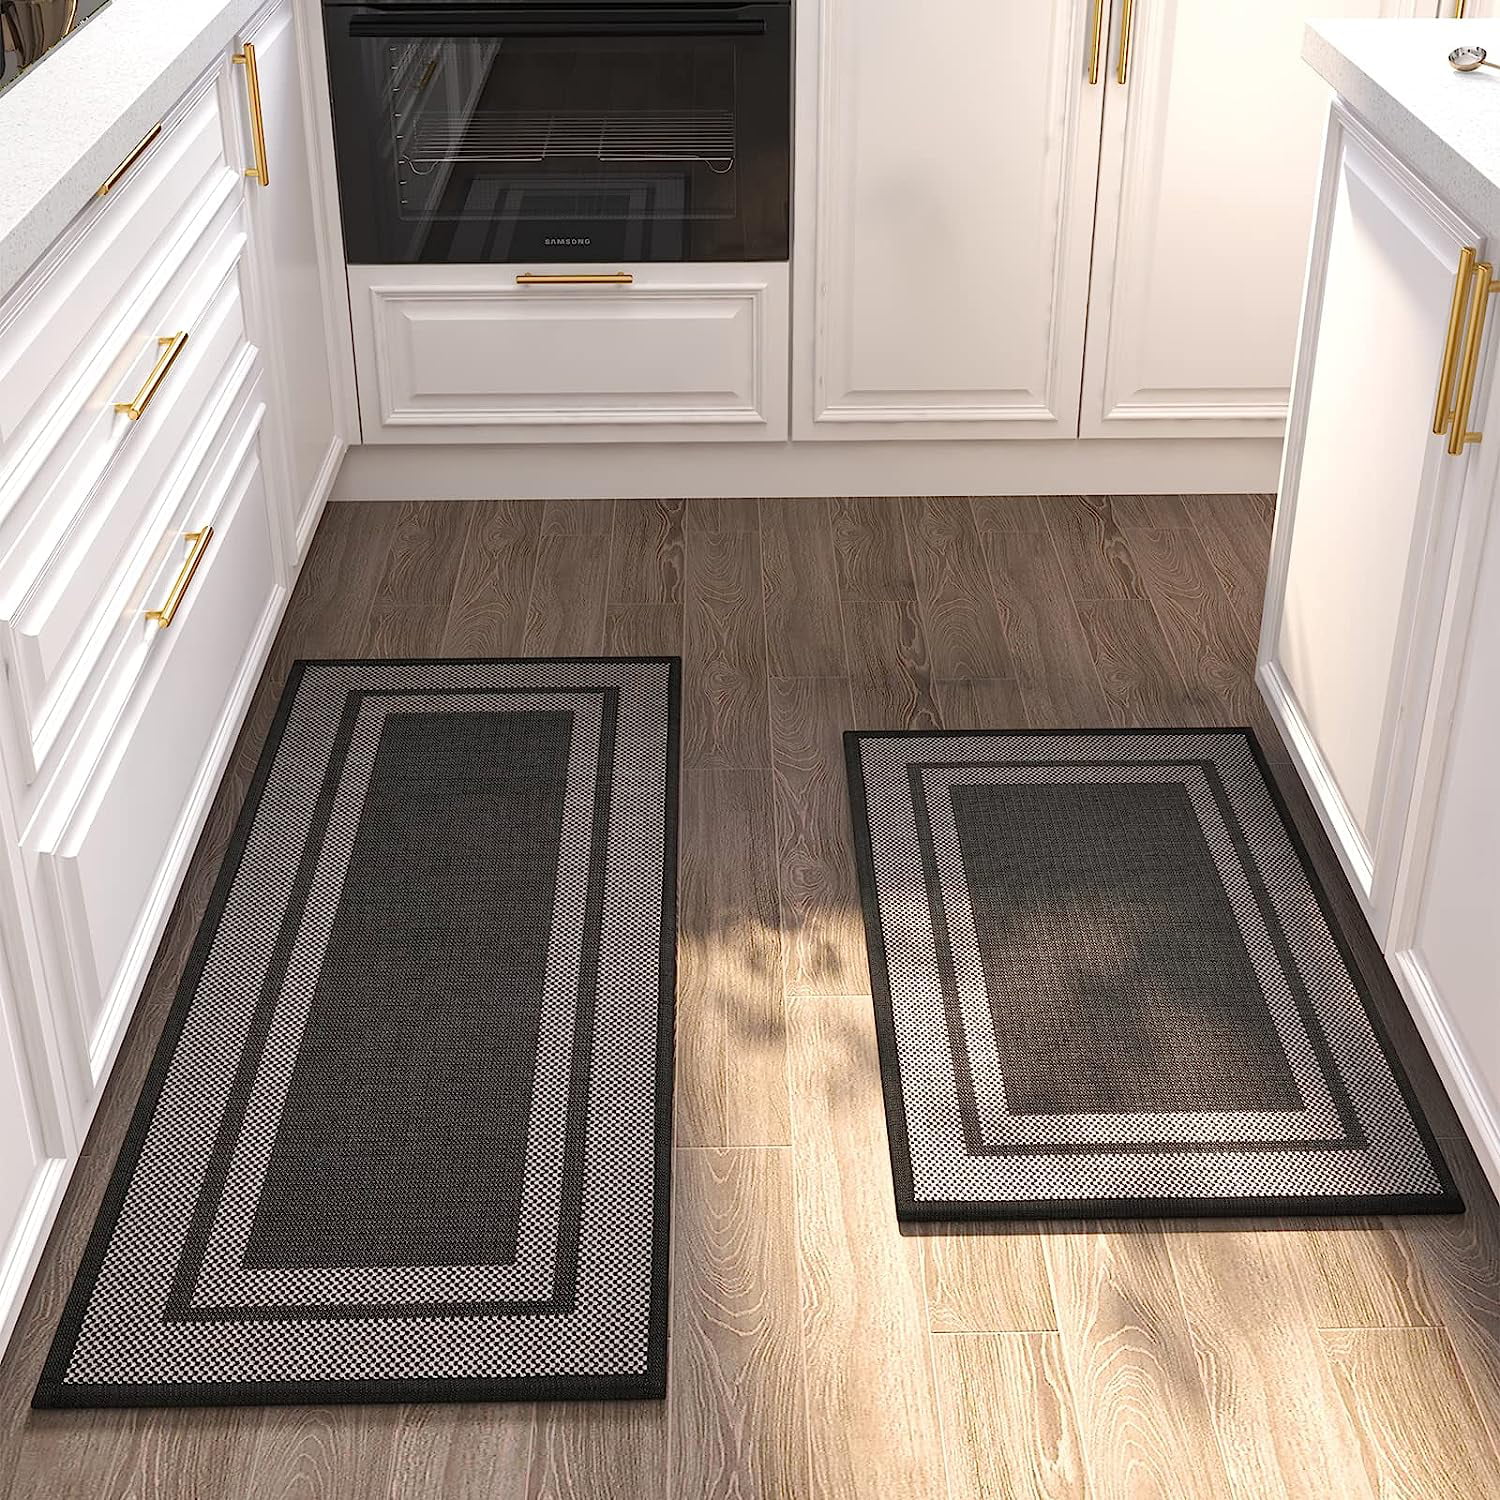 BxzanDya Kitchen Rugs and Mats Non Skid Washable, for Kitchen Sink Side  Mats, Aisle Rugs, Hallway Rugs 20x64…